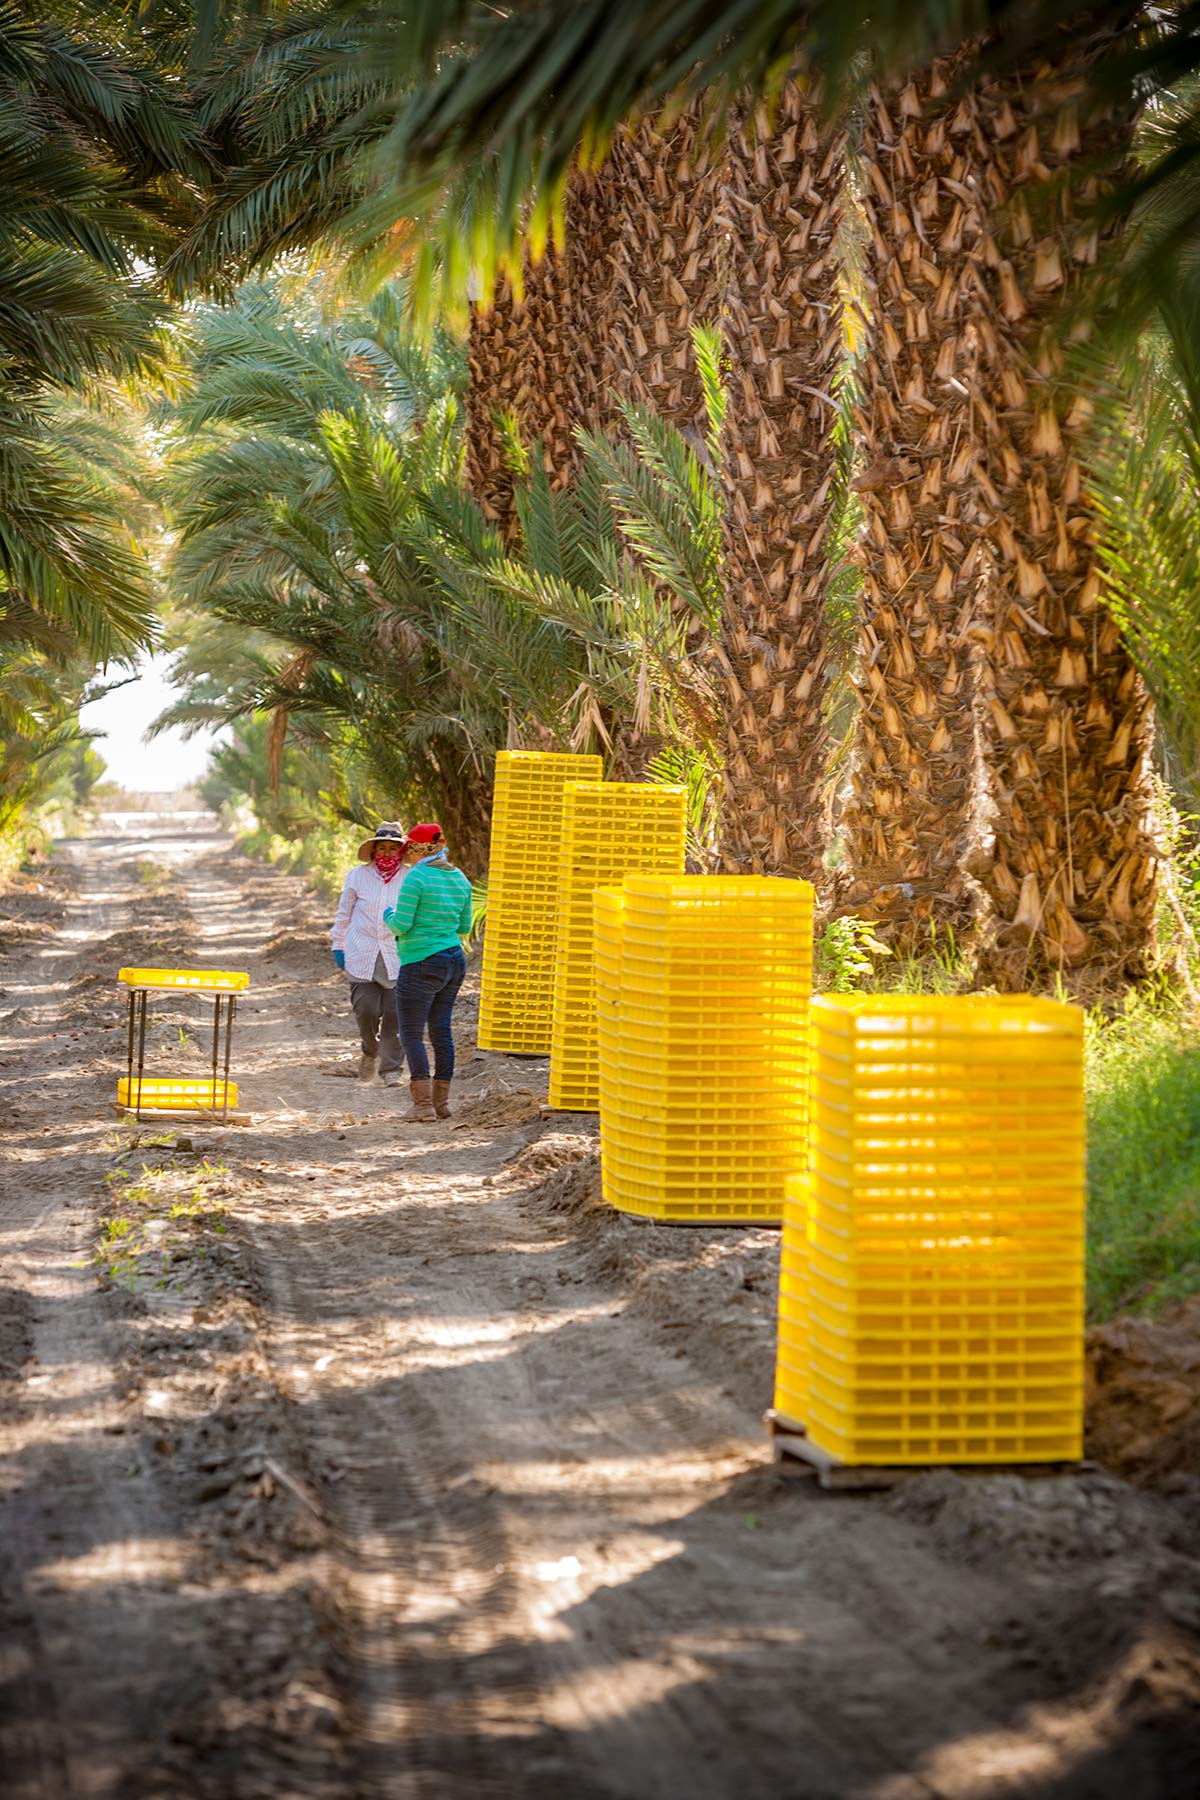 Oasis Date Gardens - Date Palms